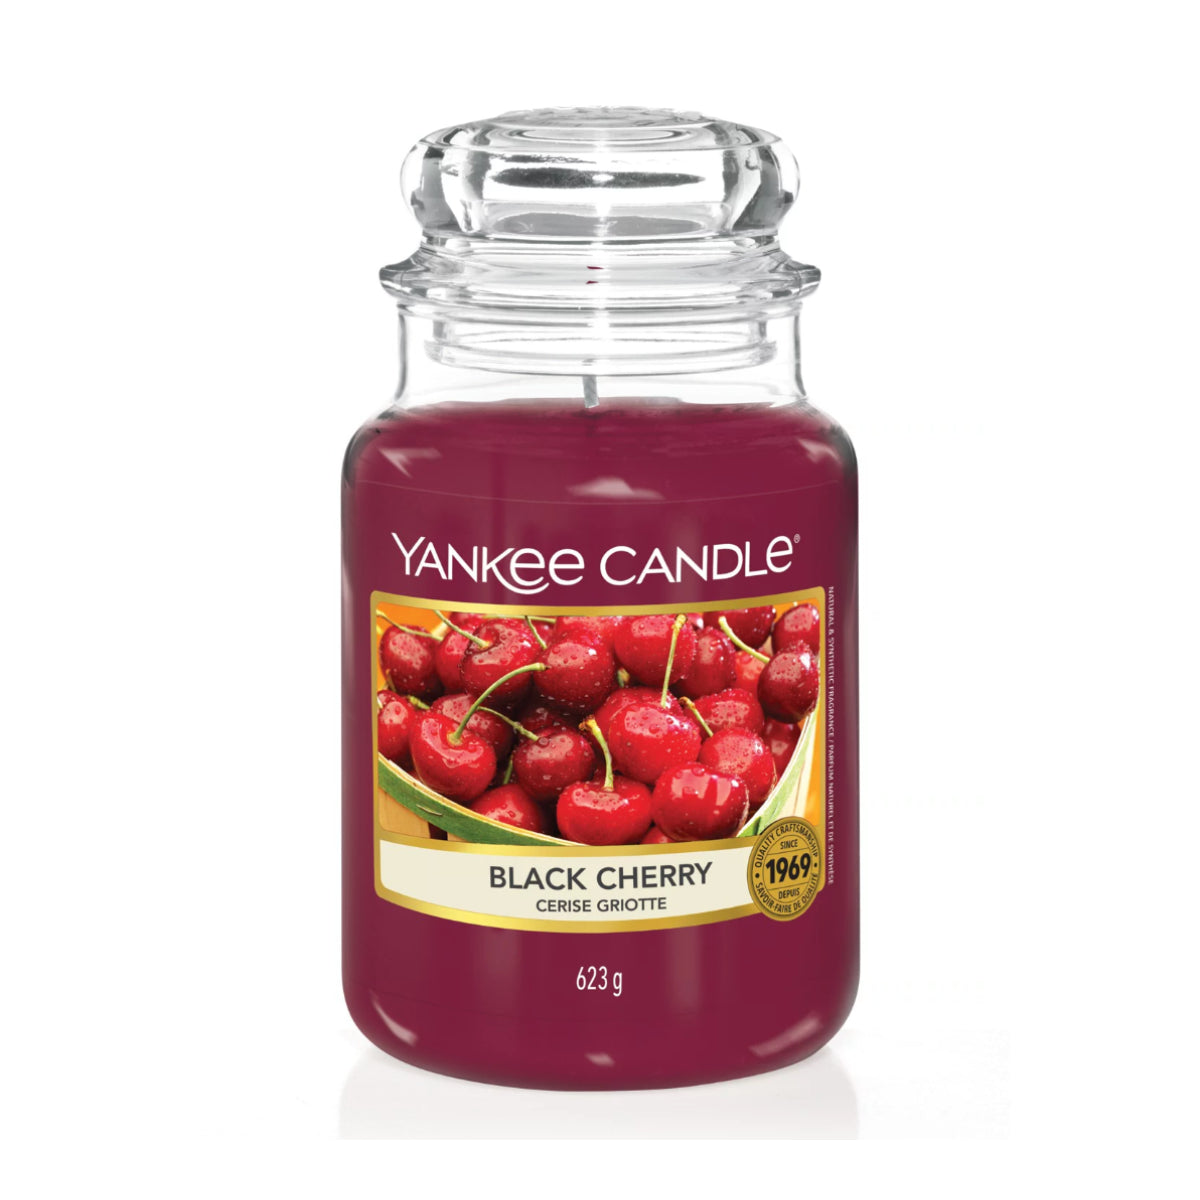 Black Cherry Yankee Candle Candle